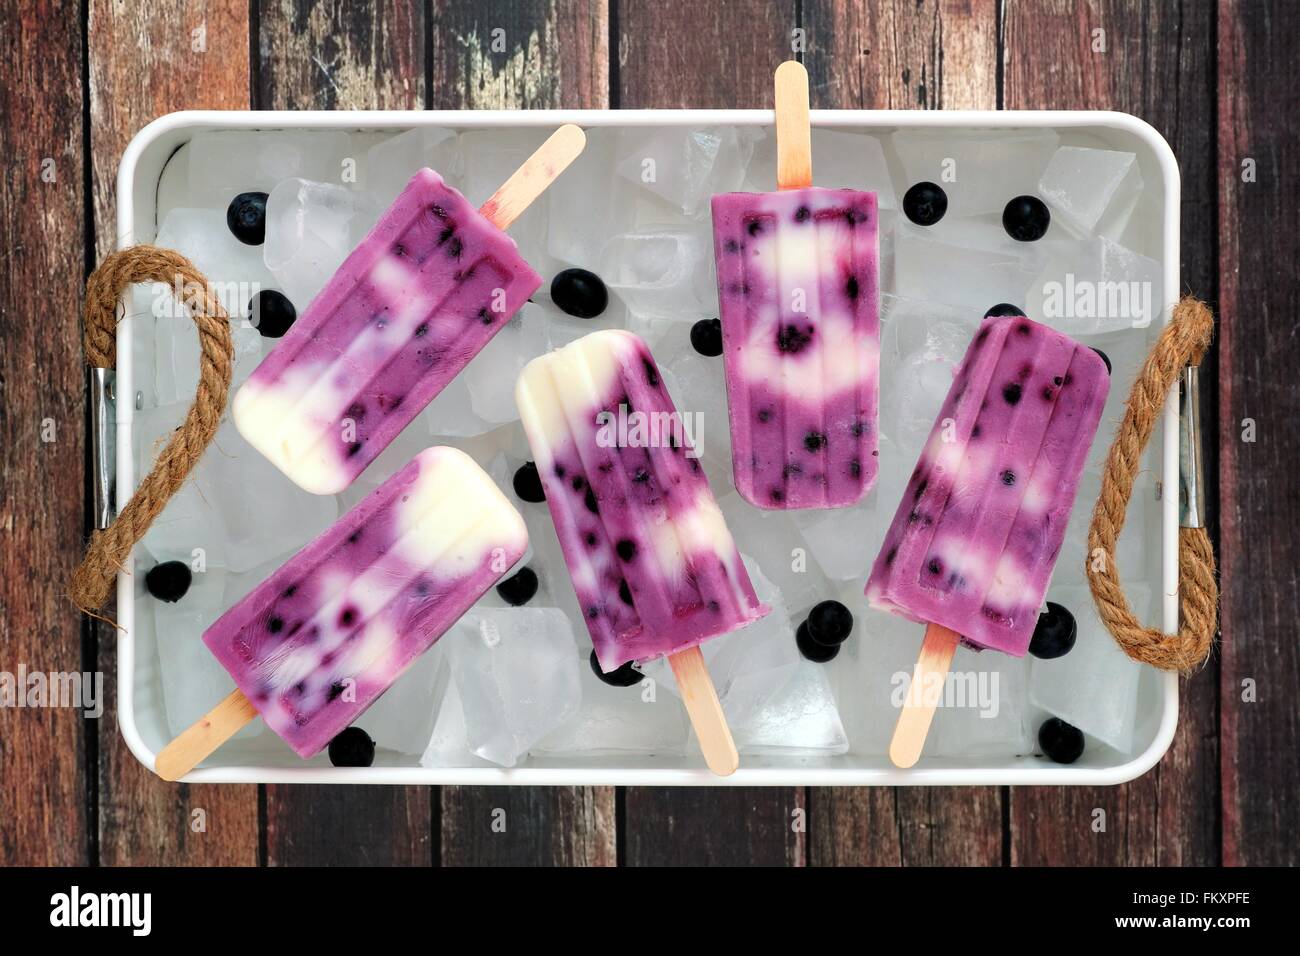 Ice Pops High Resolution Stock Photography and Images - Alamy